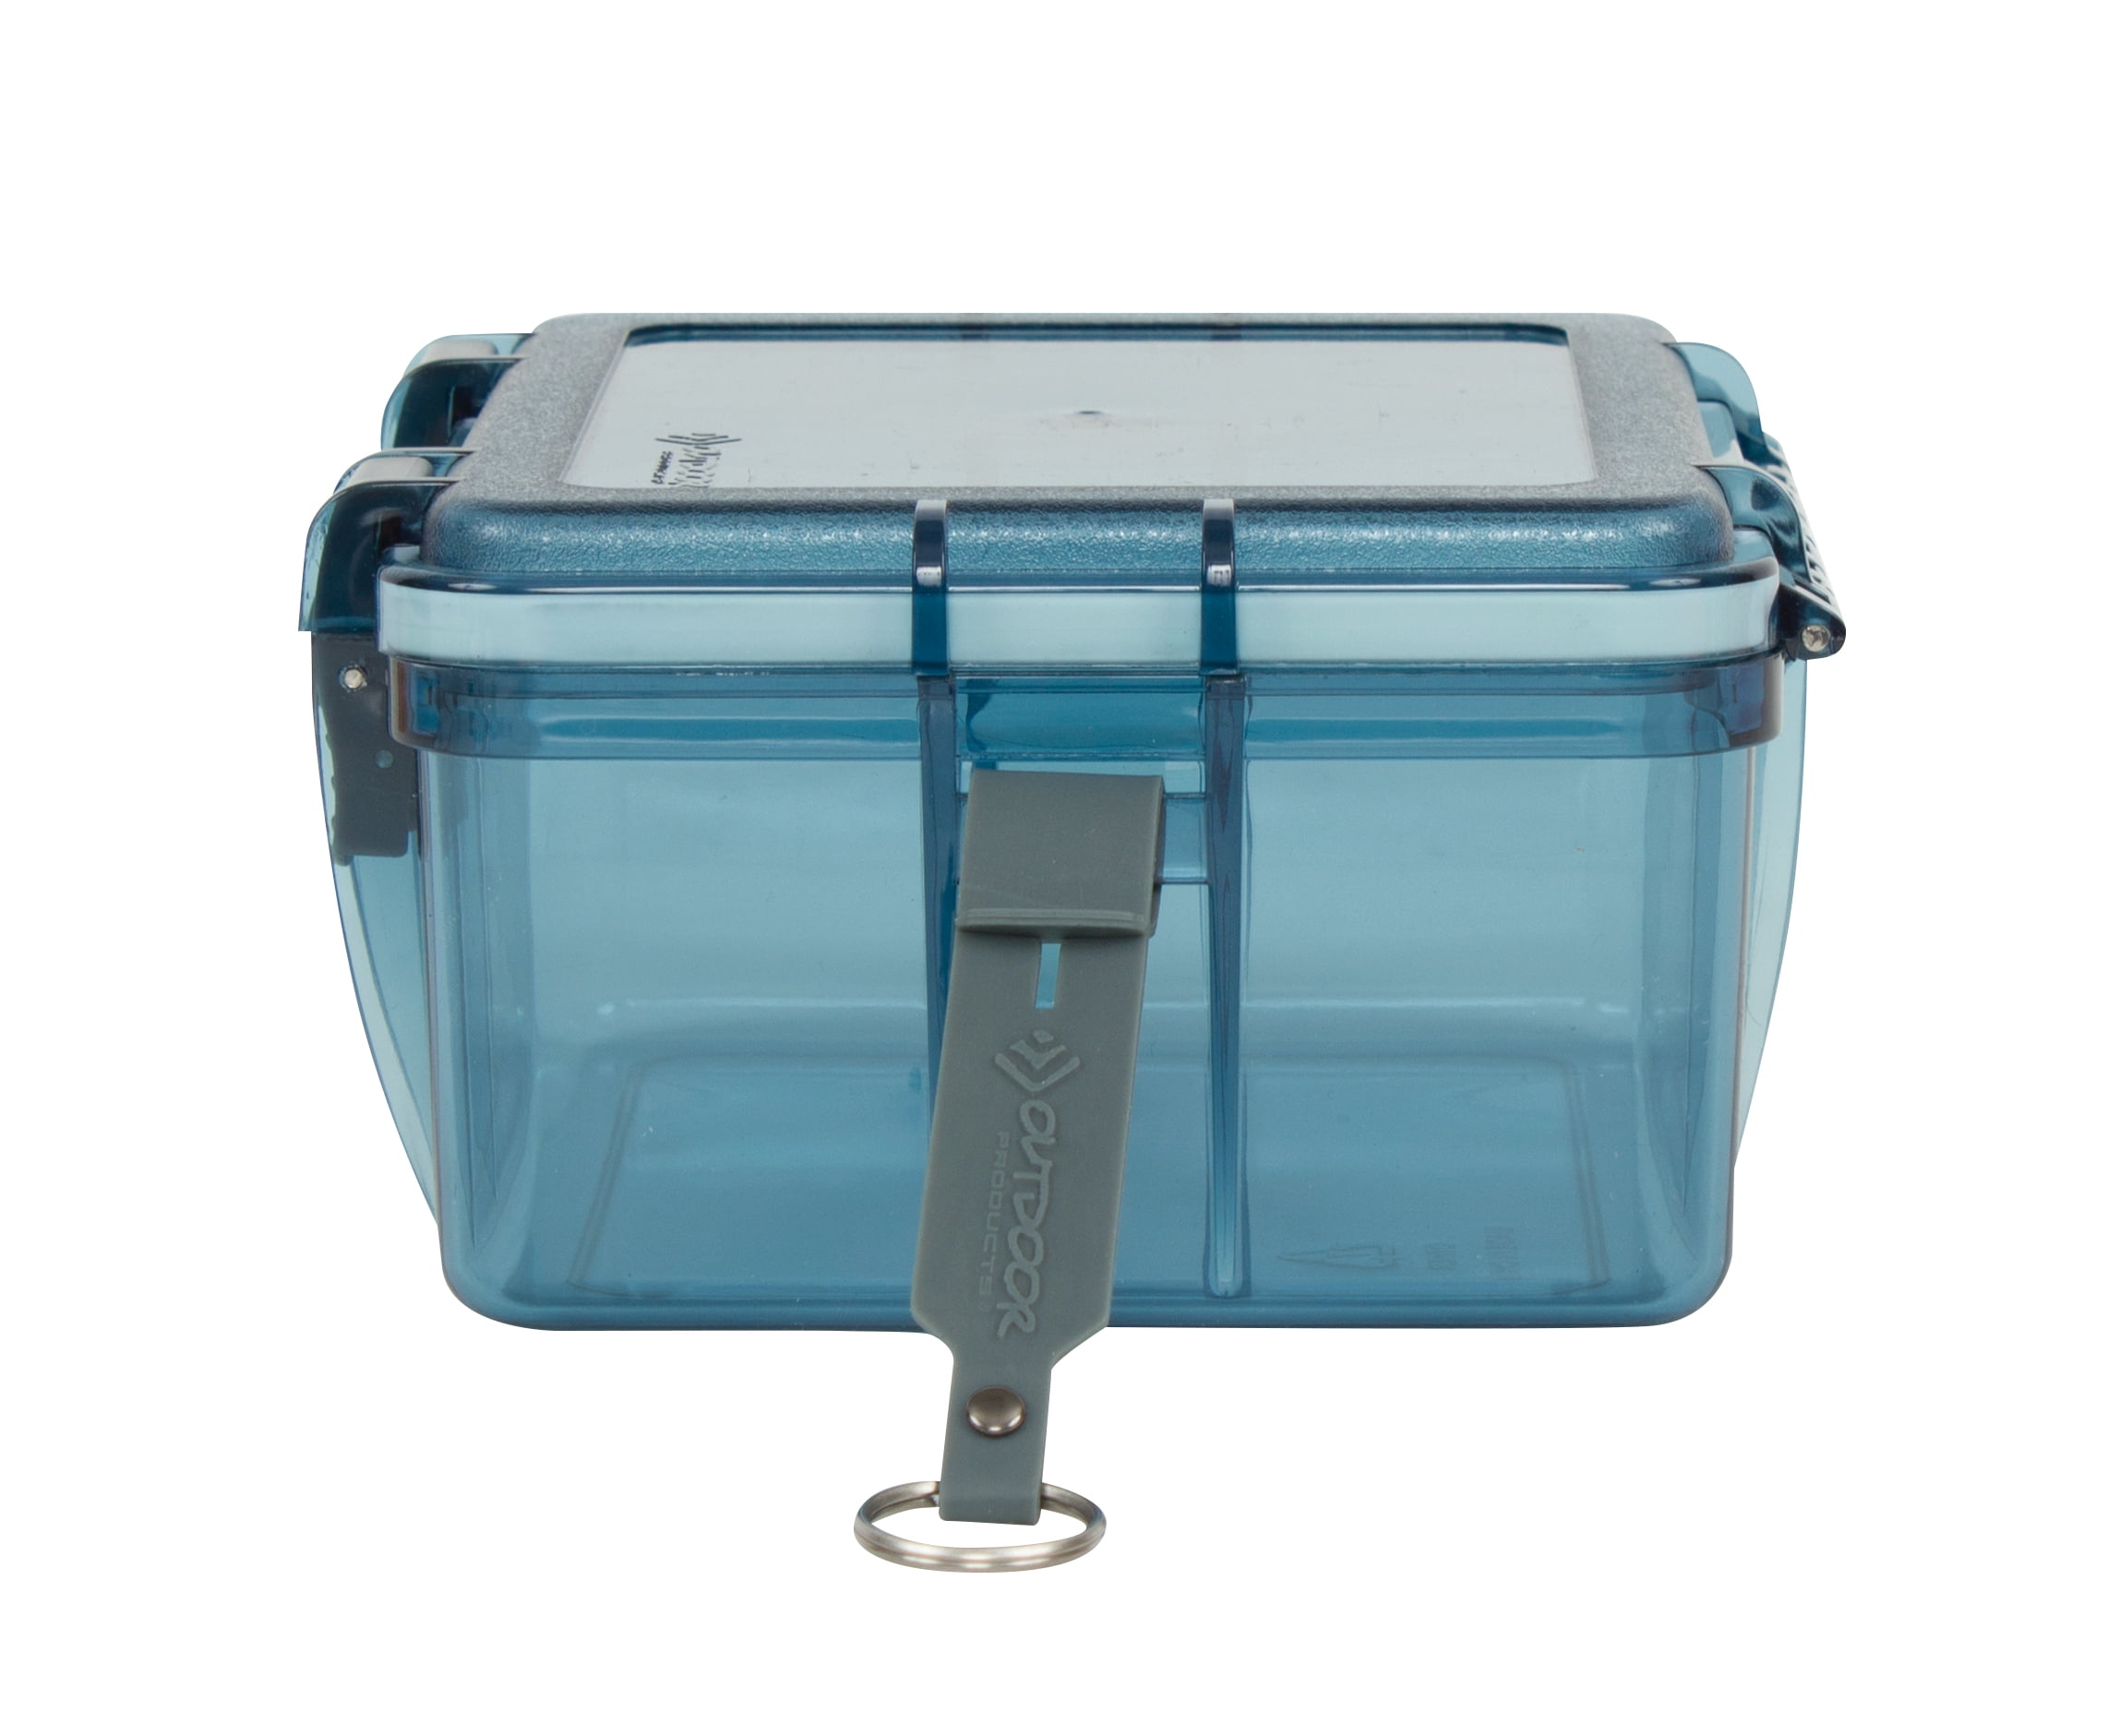 Outdoor Products Large Watertight Case Dry Box, Blue, 8 x 6.75 x